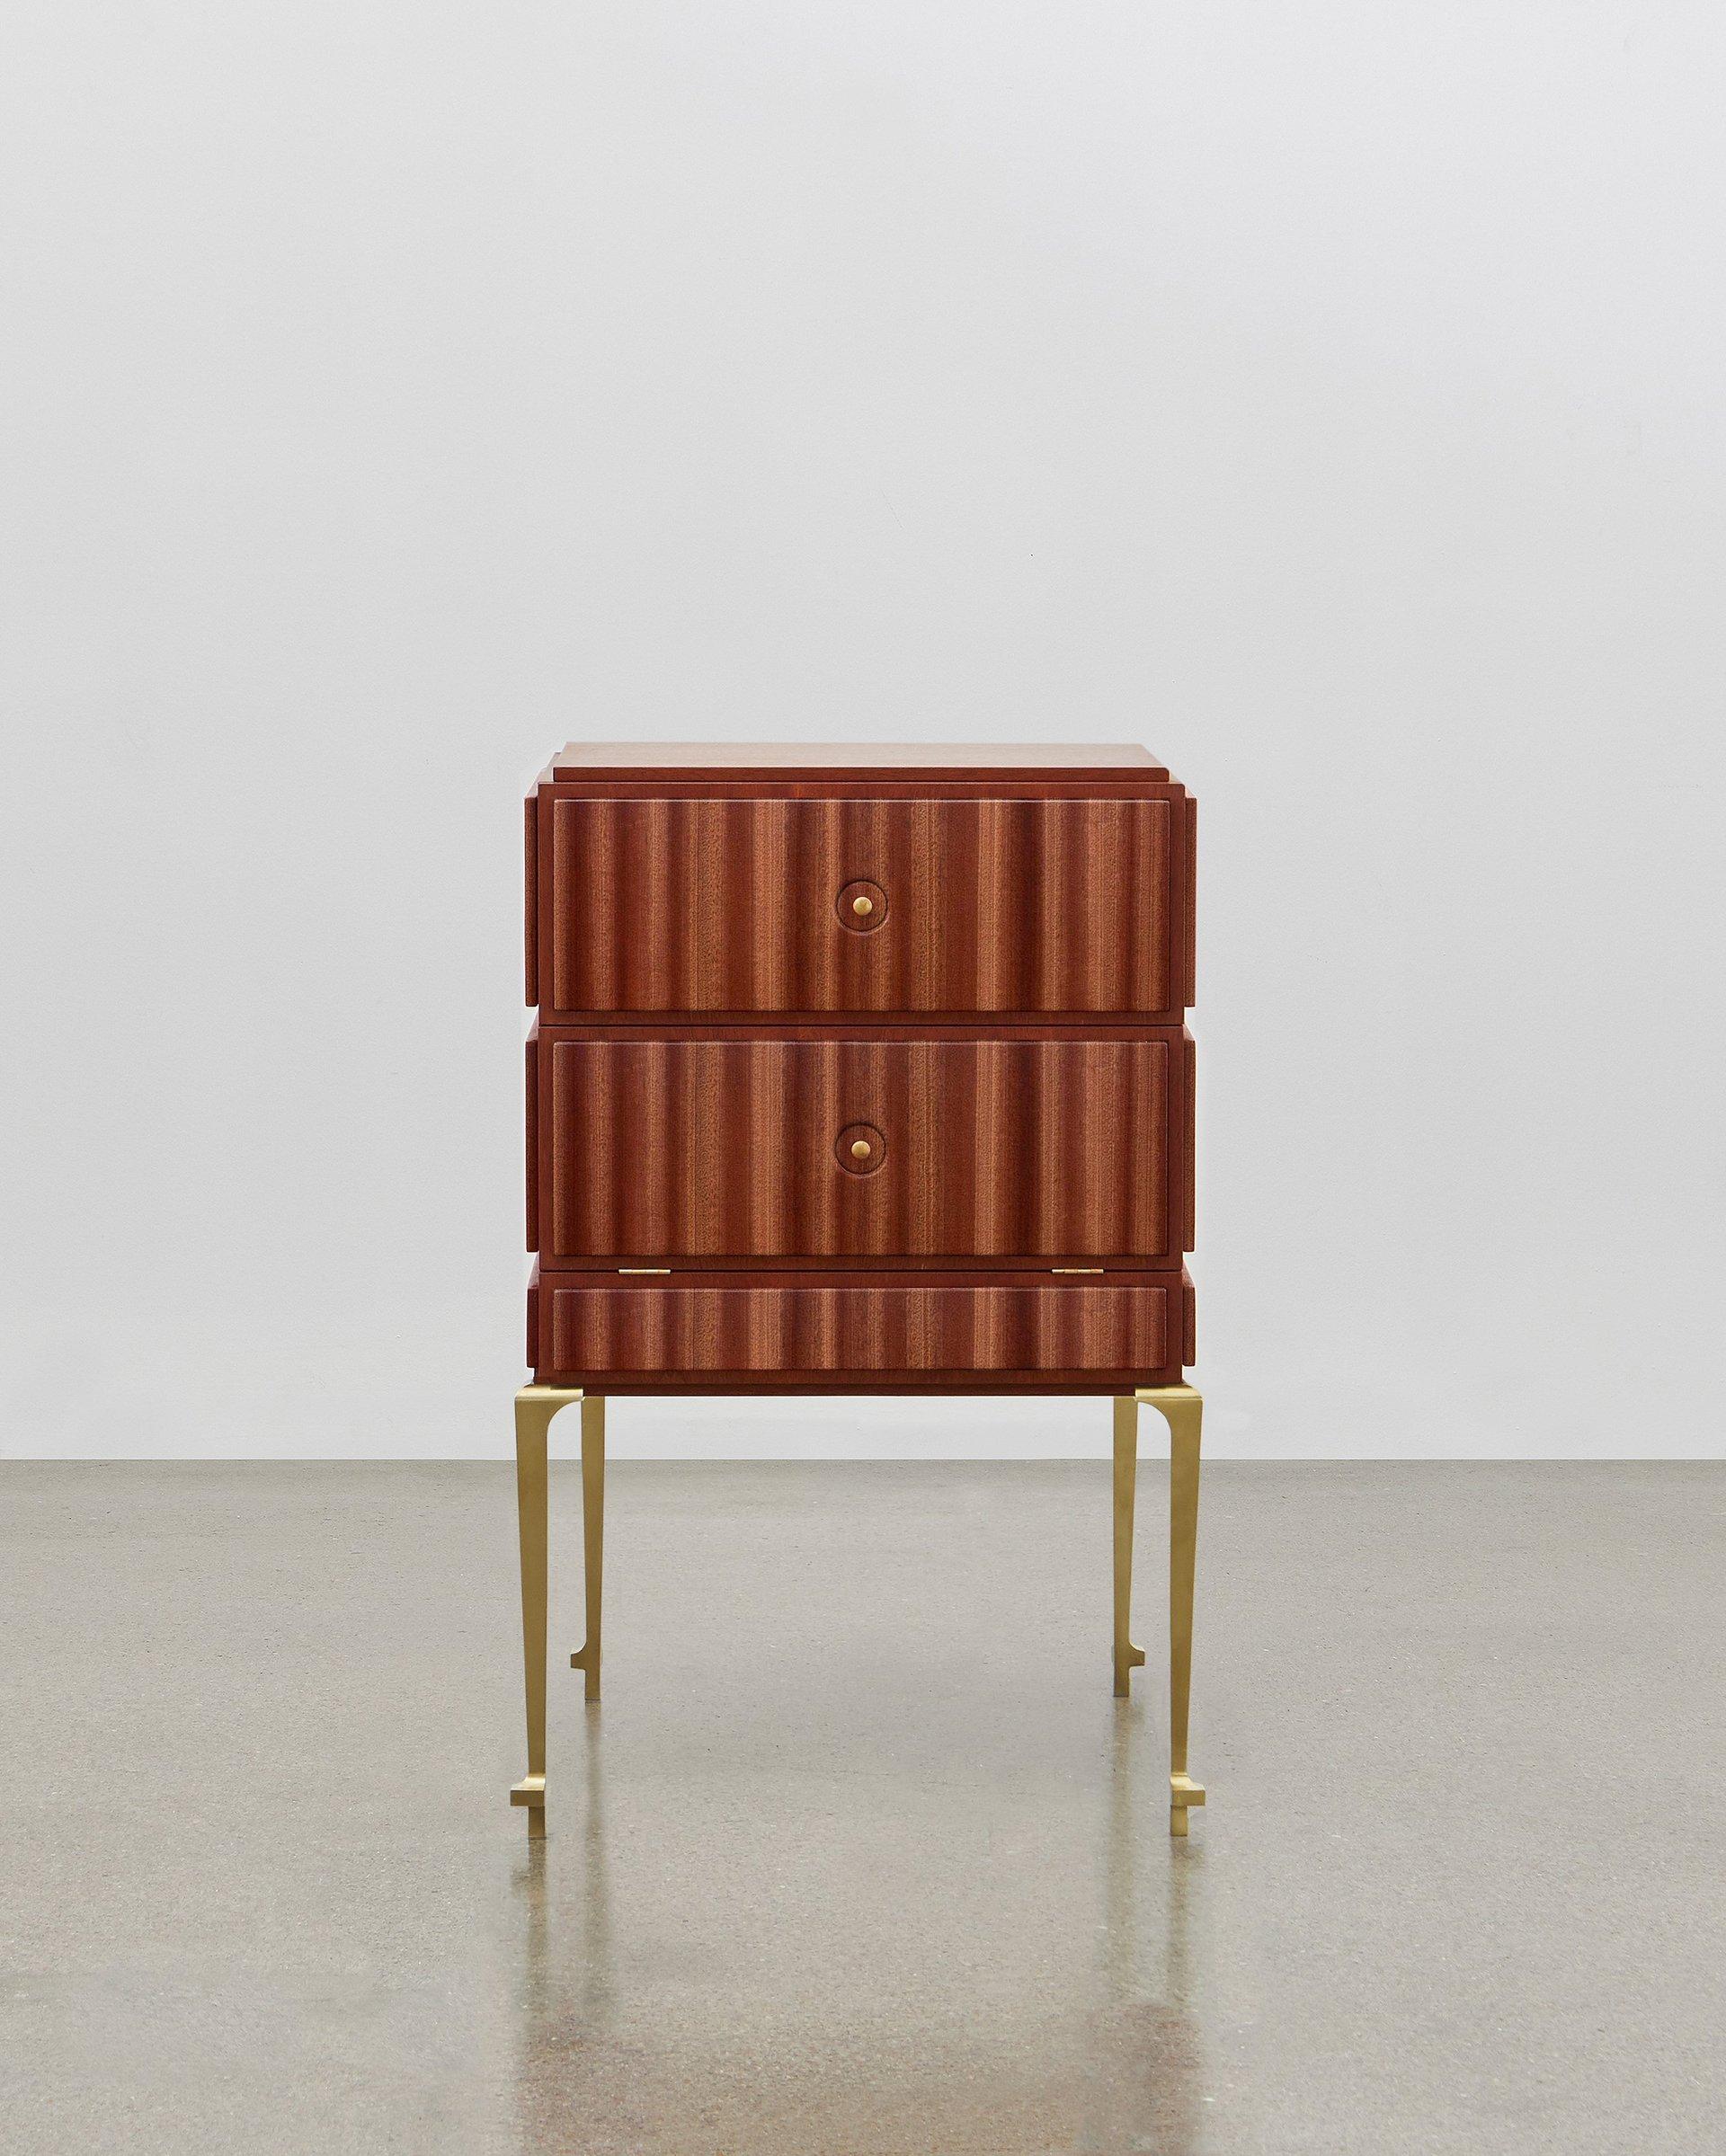 This small but perfectly formed storage piece is made out of wood and can be combined with soft leather on the panels. 

It is elegant and stylish all the way around and from all angles. Poul Henningsen designed this in 1920.

The PH small